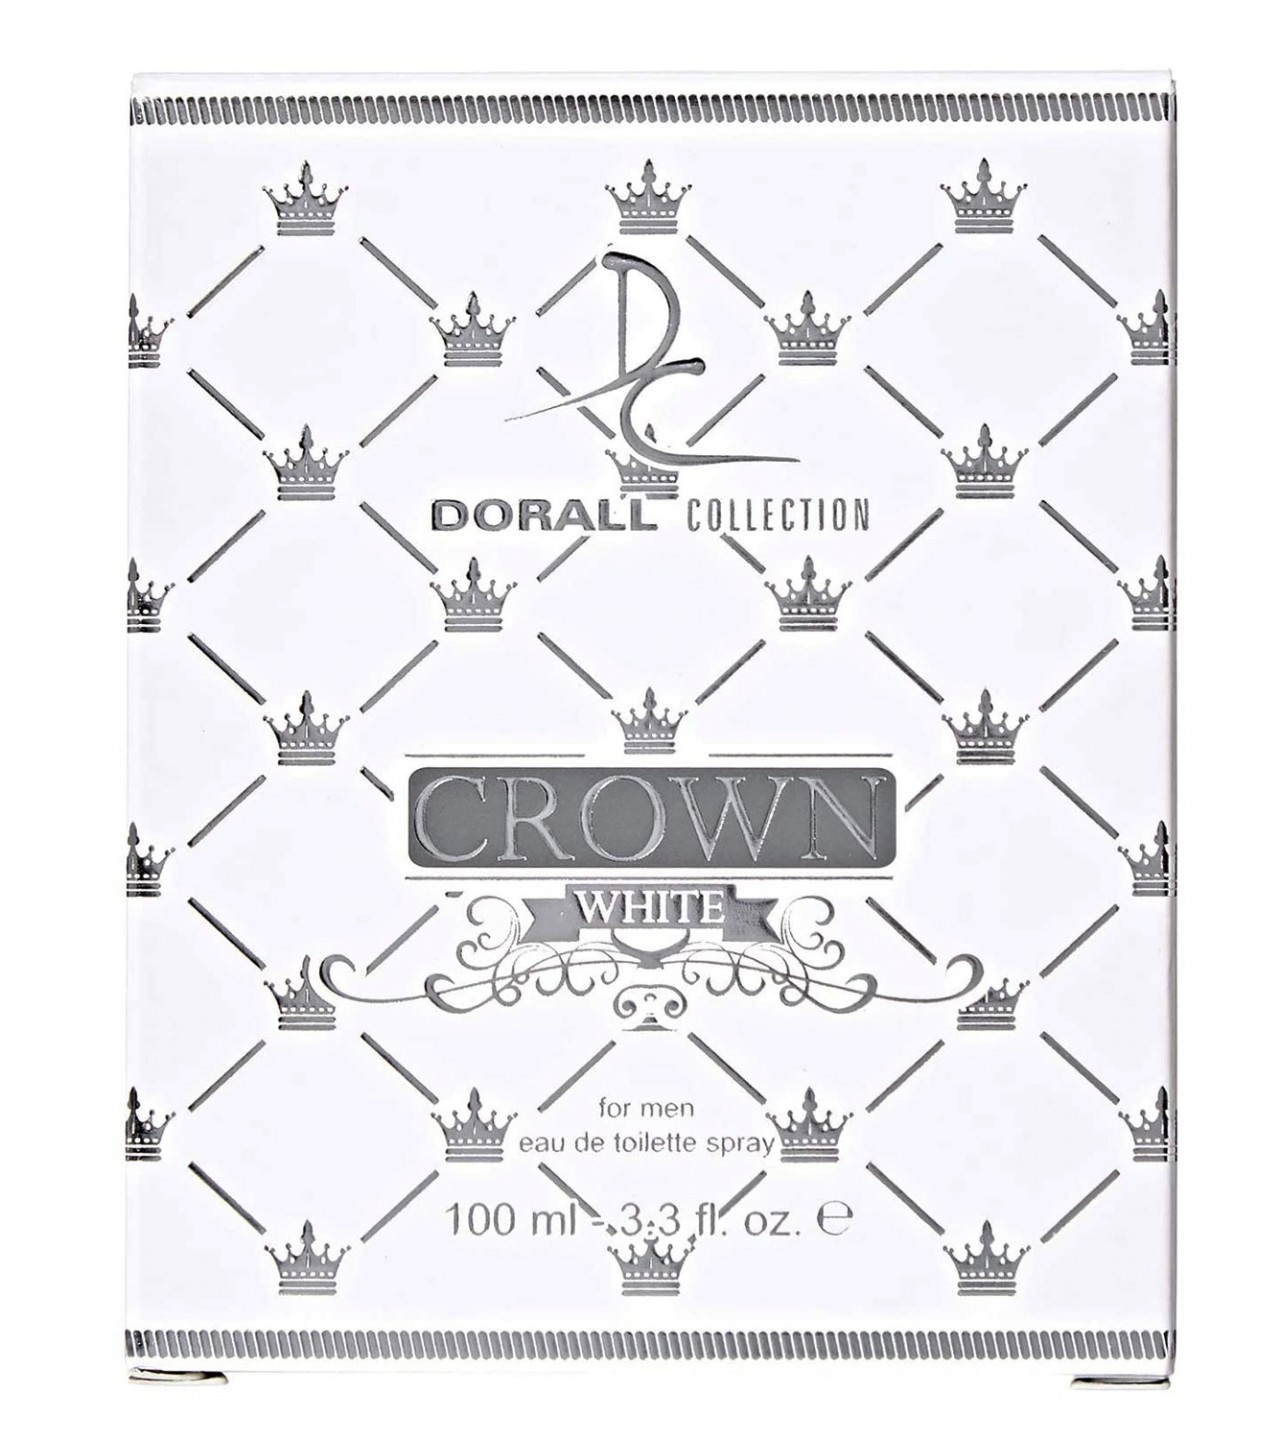 Dorall Collection Crown White Perfume For Men – 100 ml